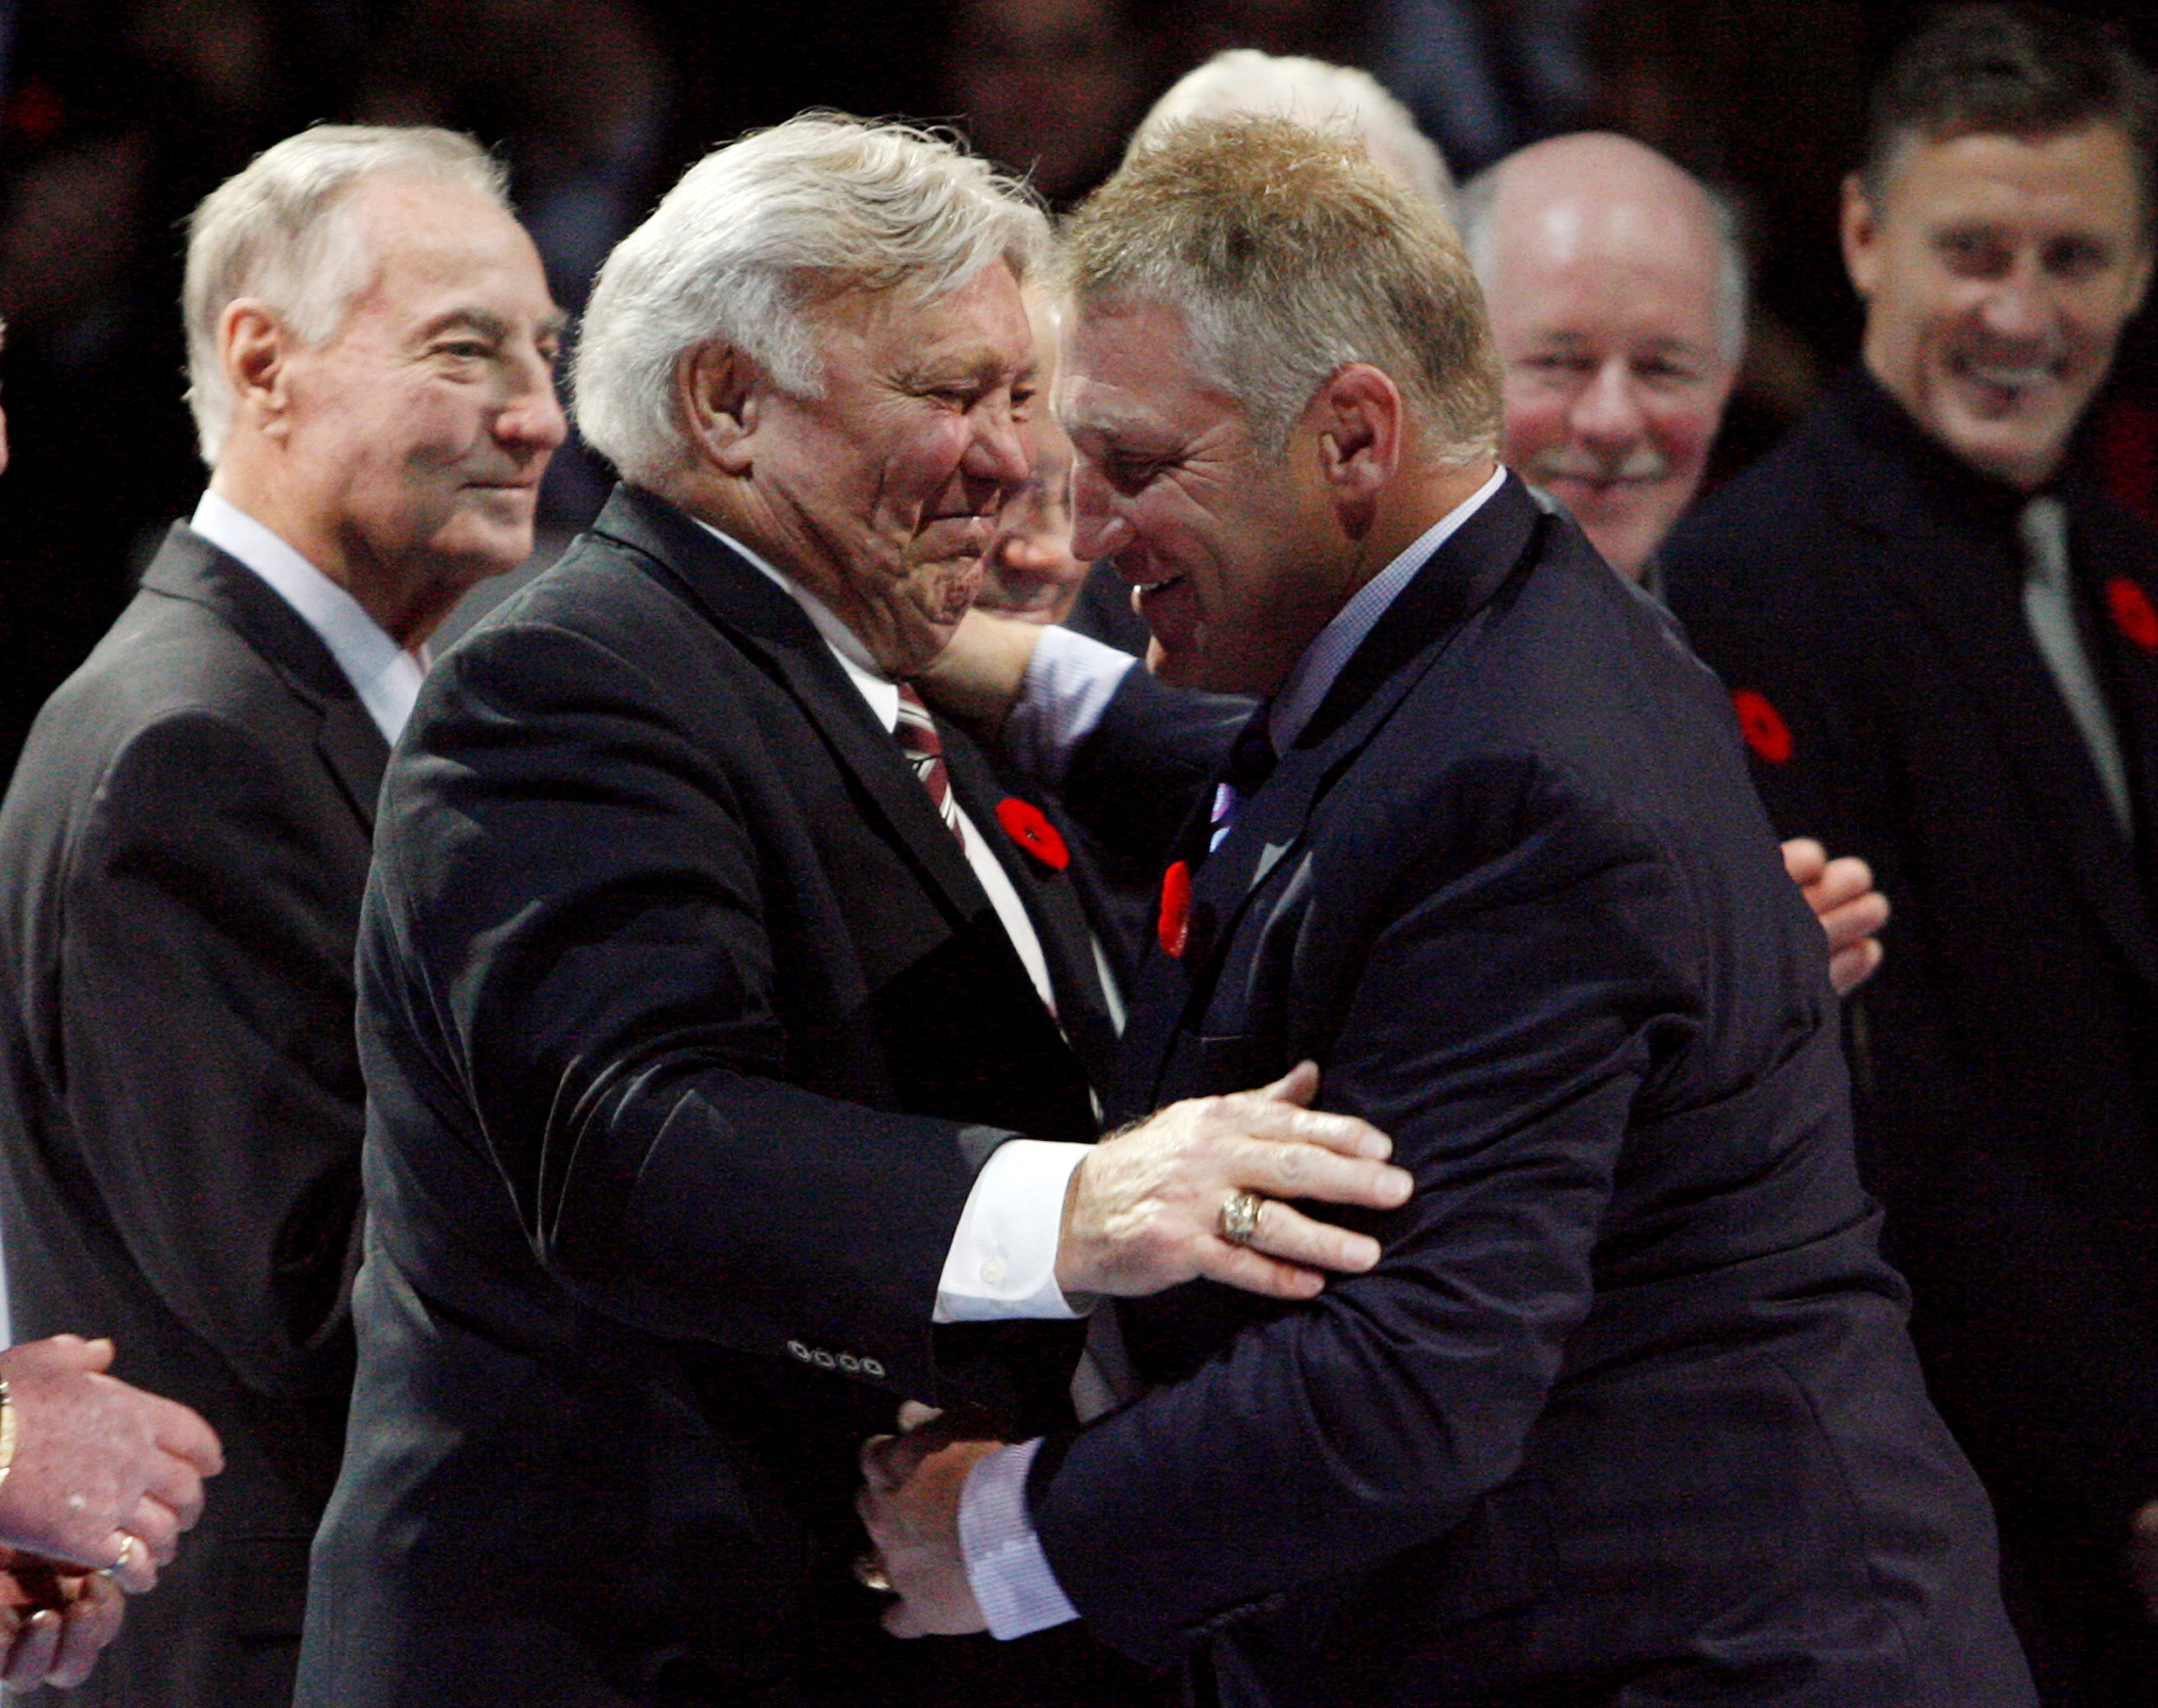 Former NHL star Hull embraces his son Brett during an on-ice ceremony to introduce the Hockey Hall of Fame 2009 inductees in Toronto